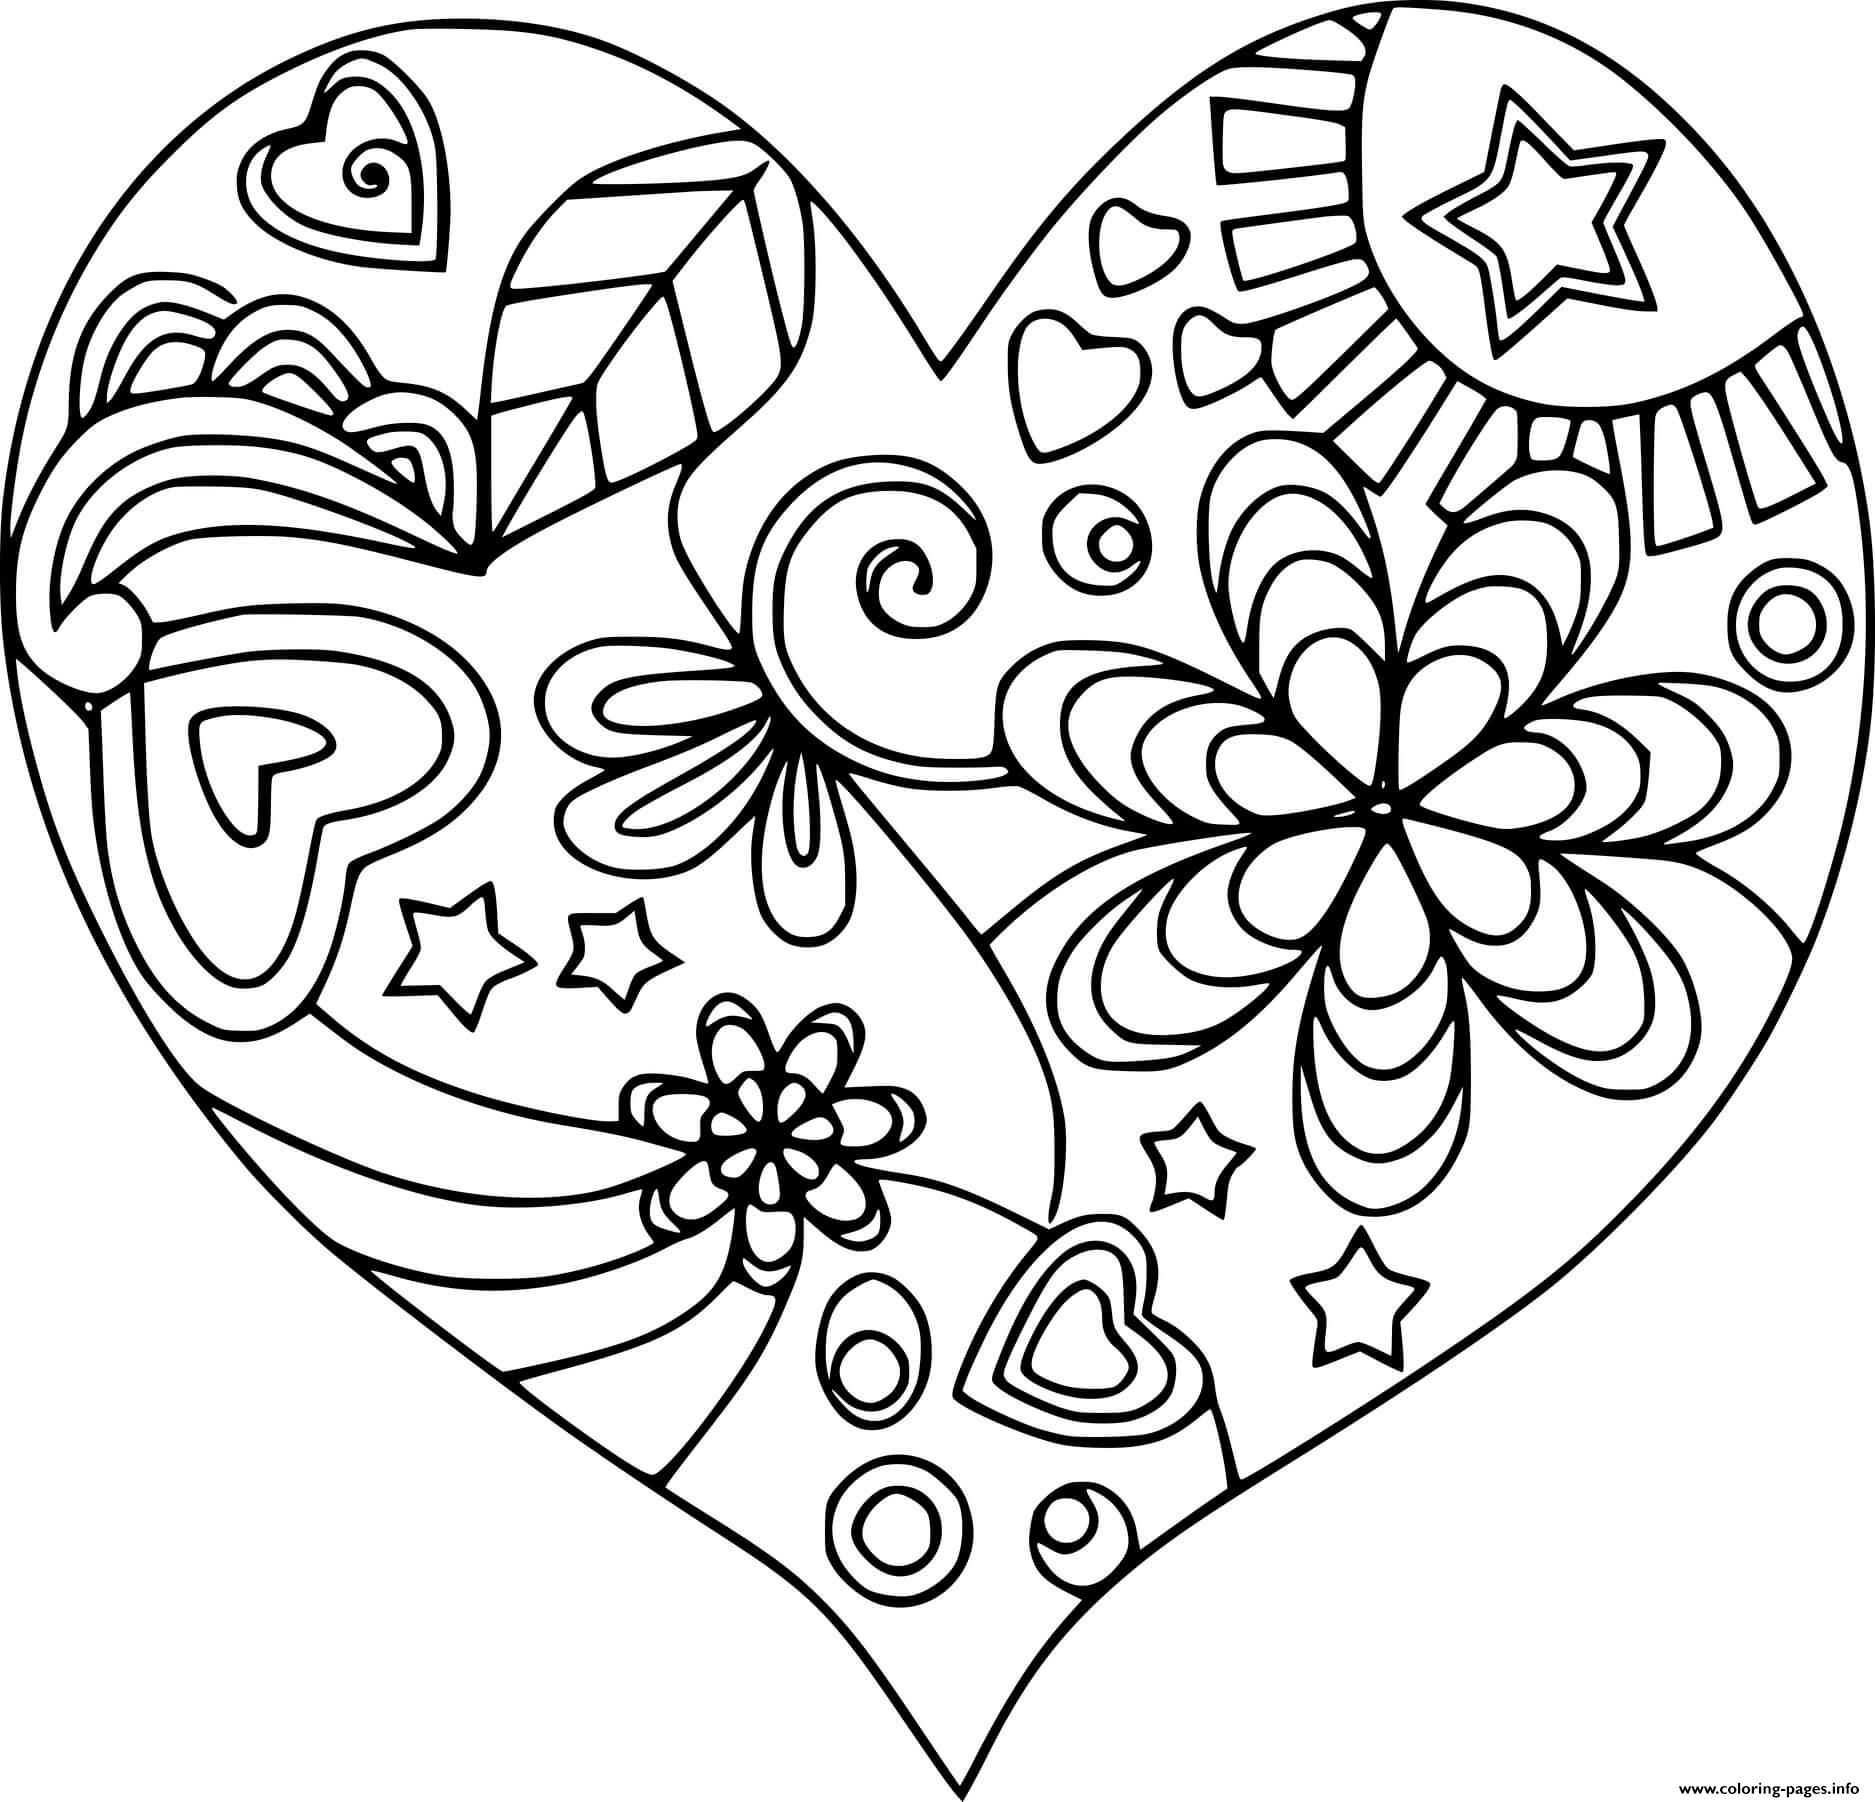 Heart With Beautiful Patterns coloring